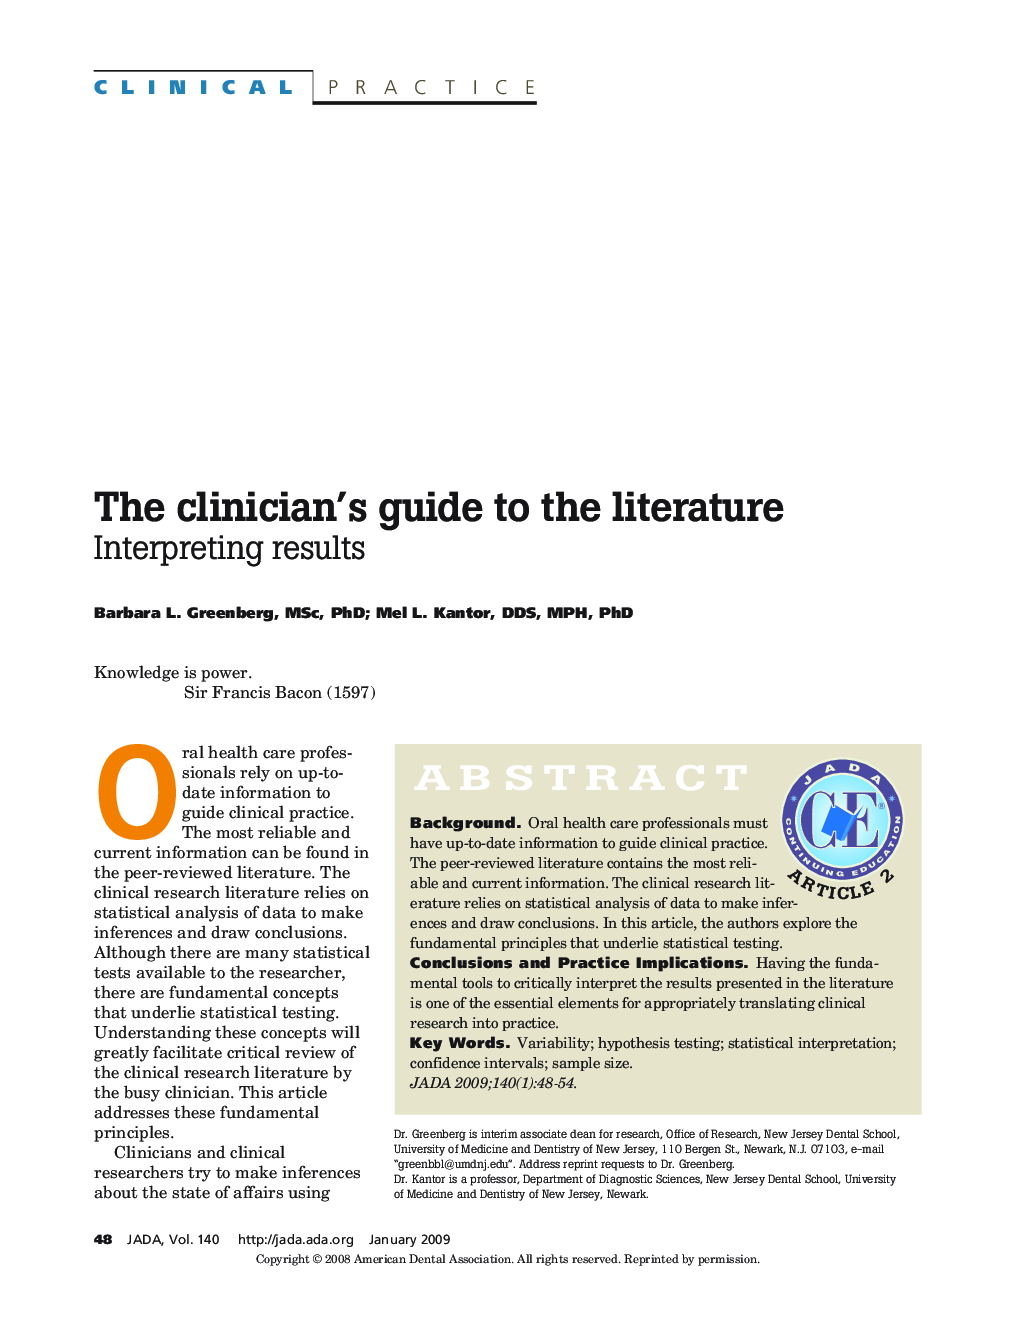 The clinician's guide to the literature : Interpreting results